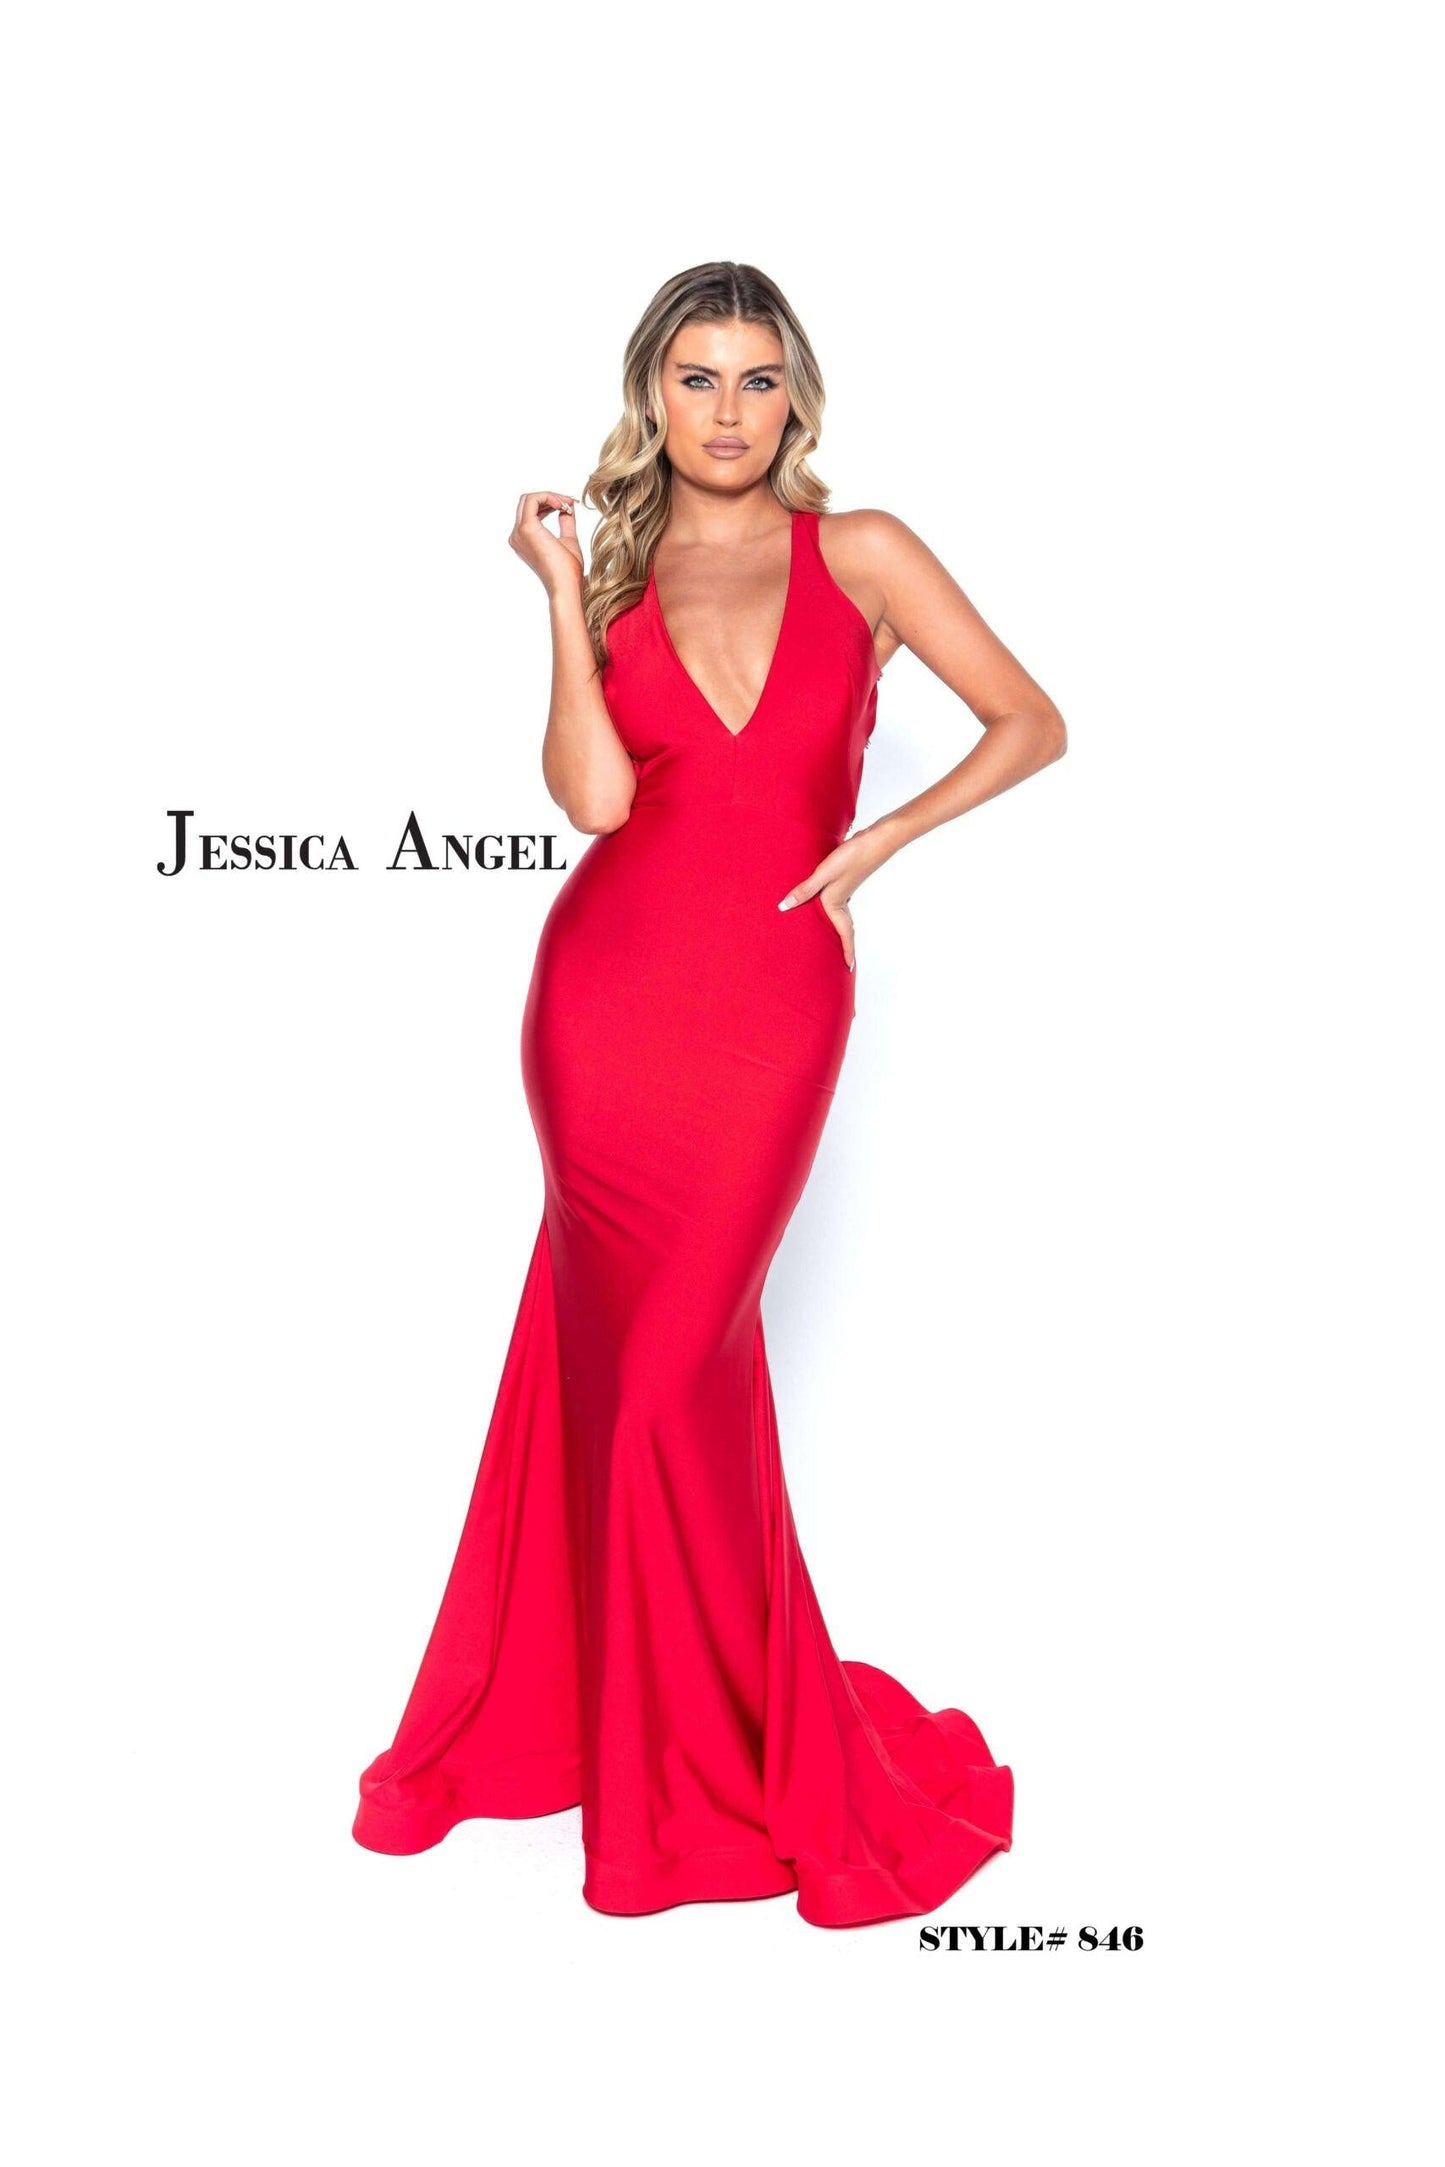 Jessica Angel Halter Long Fitted Dress 846 - The Dress Outlet